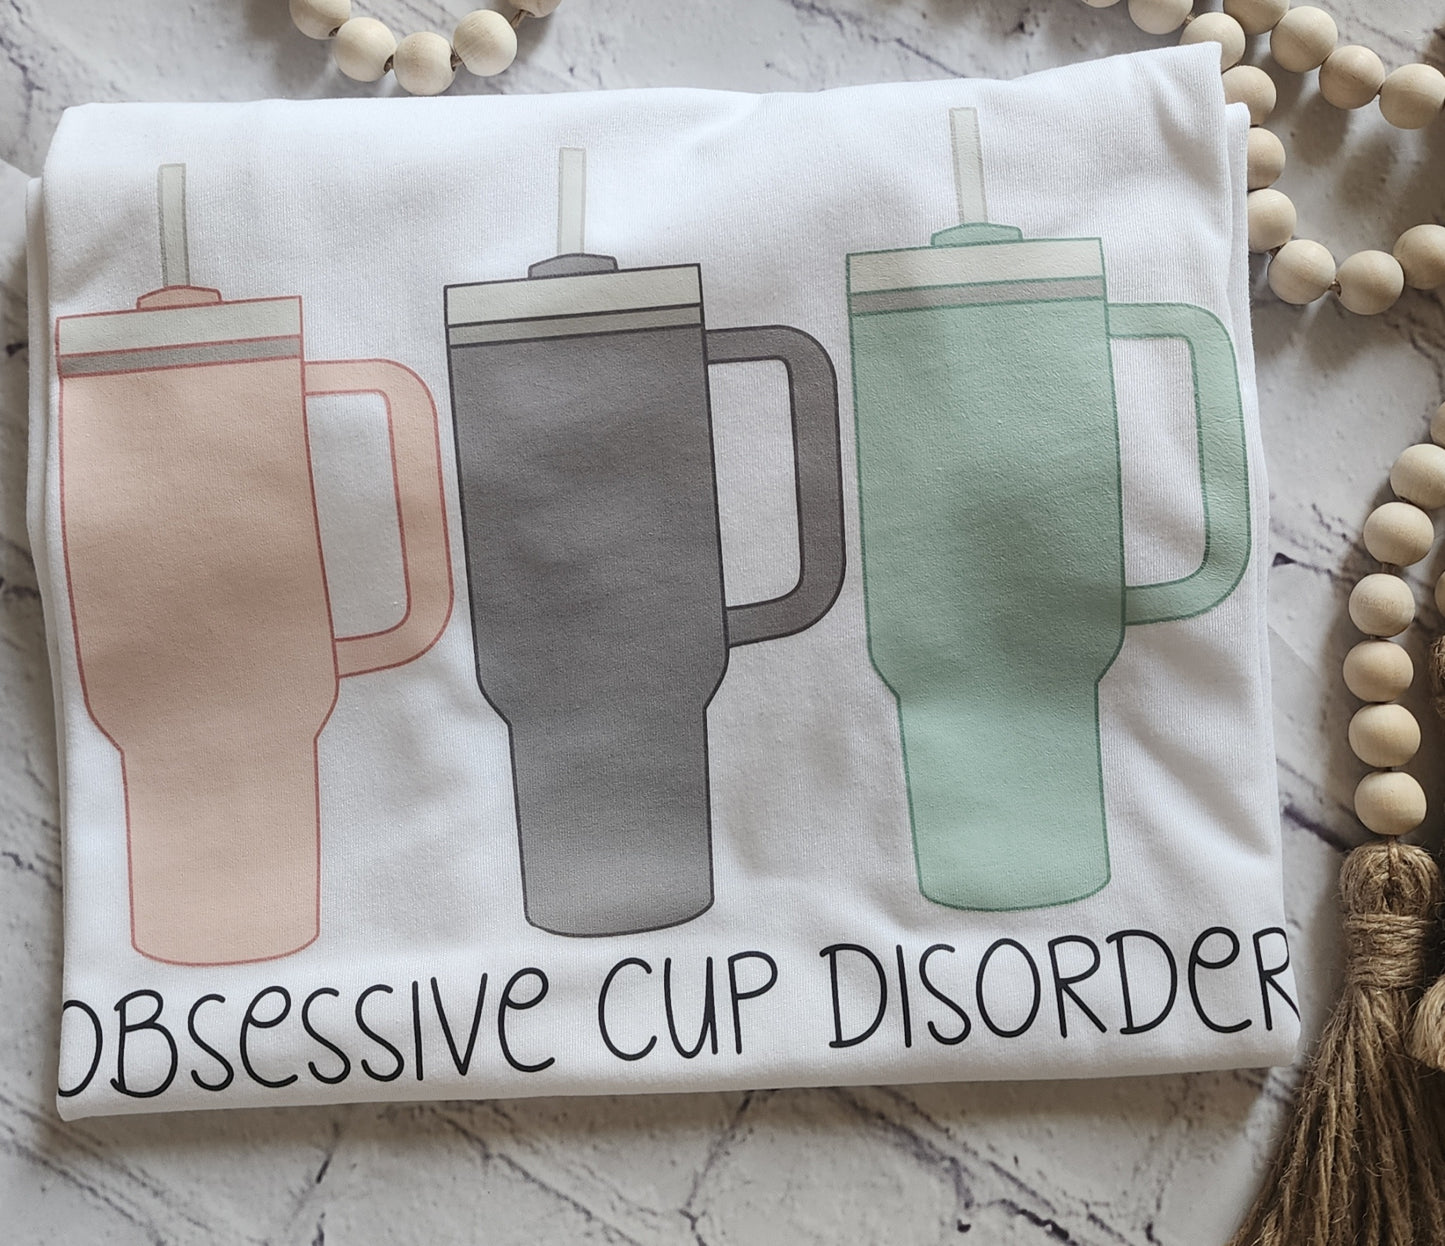 Obsessive Cup Disorder Tee